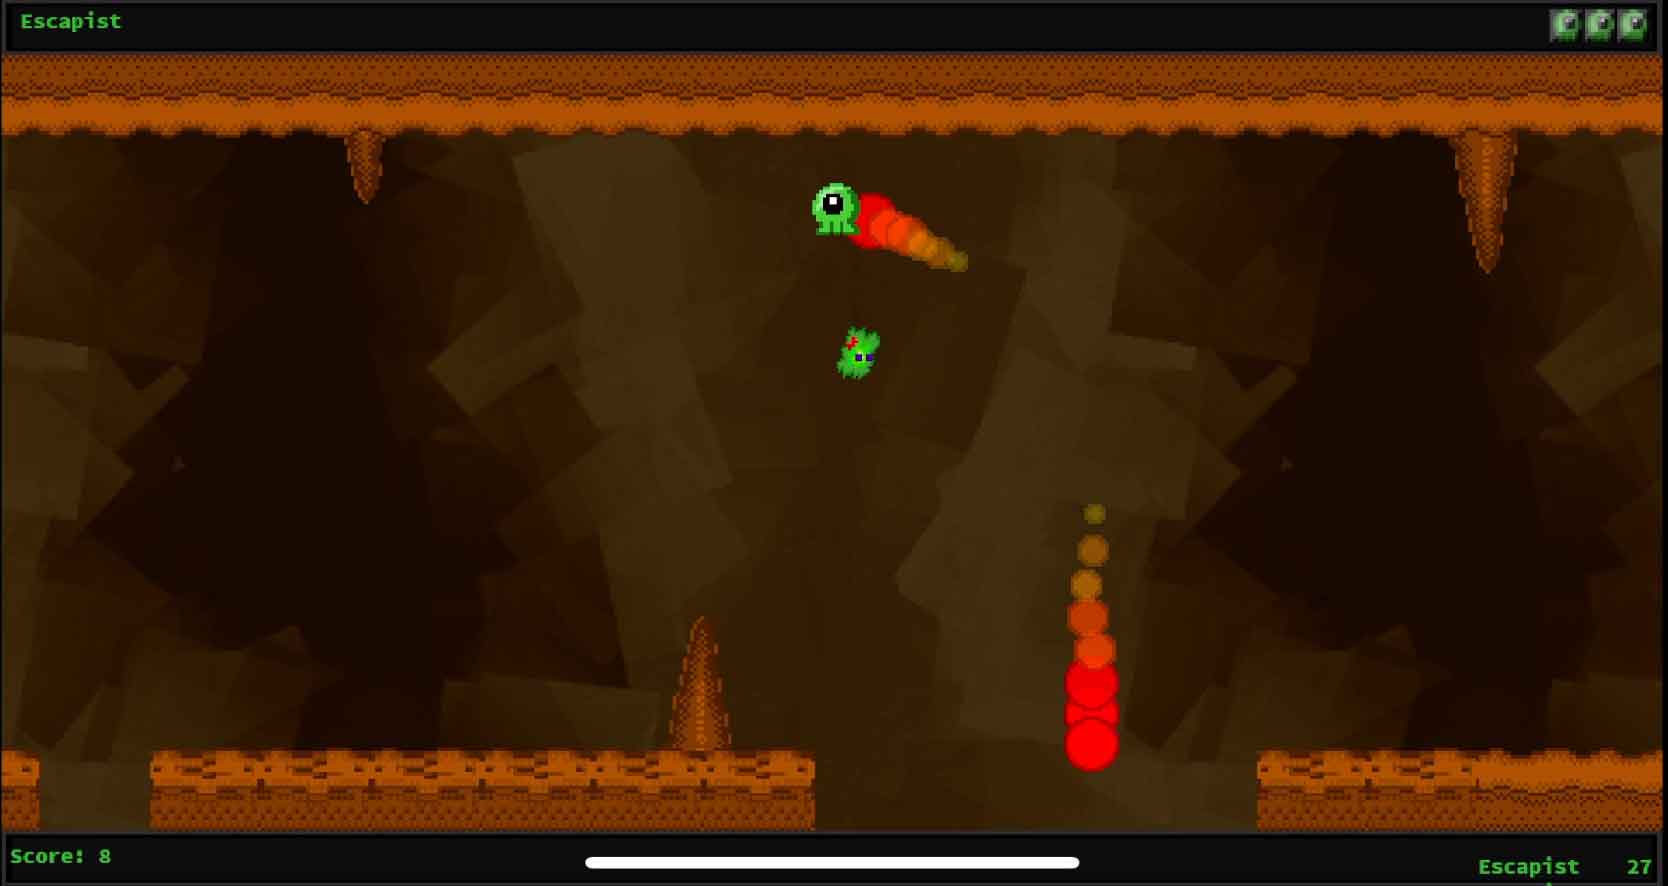 cave escape screenshot getting hit by a fireball